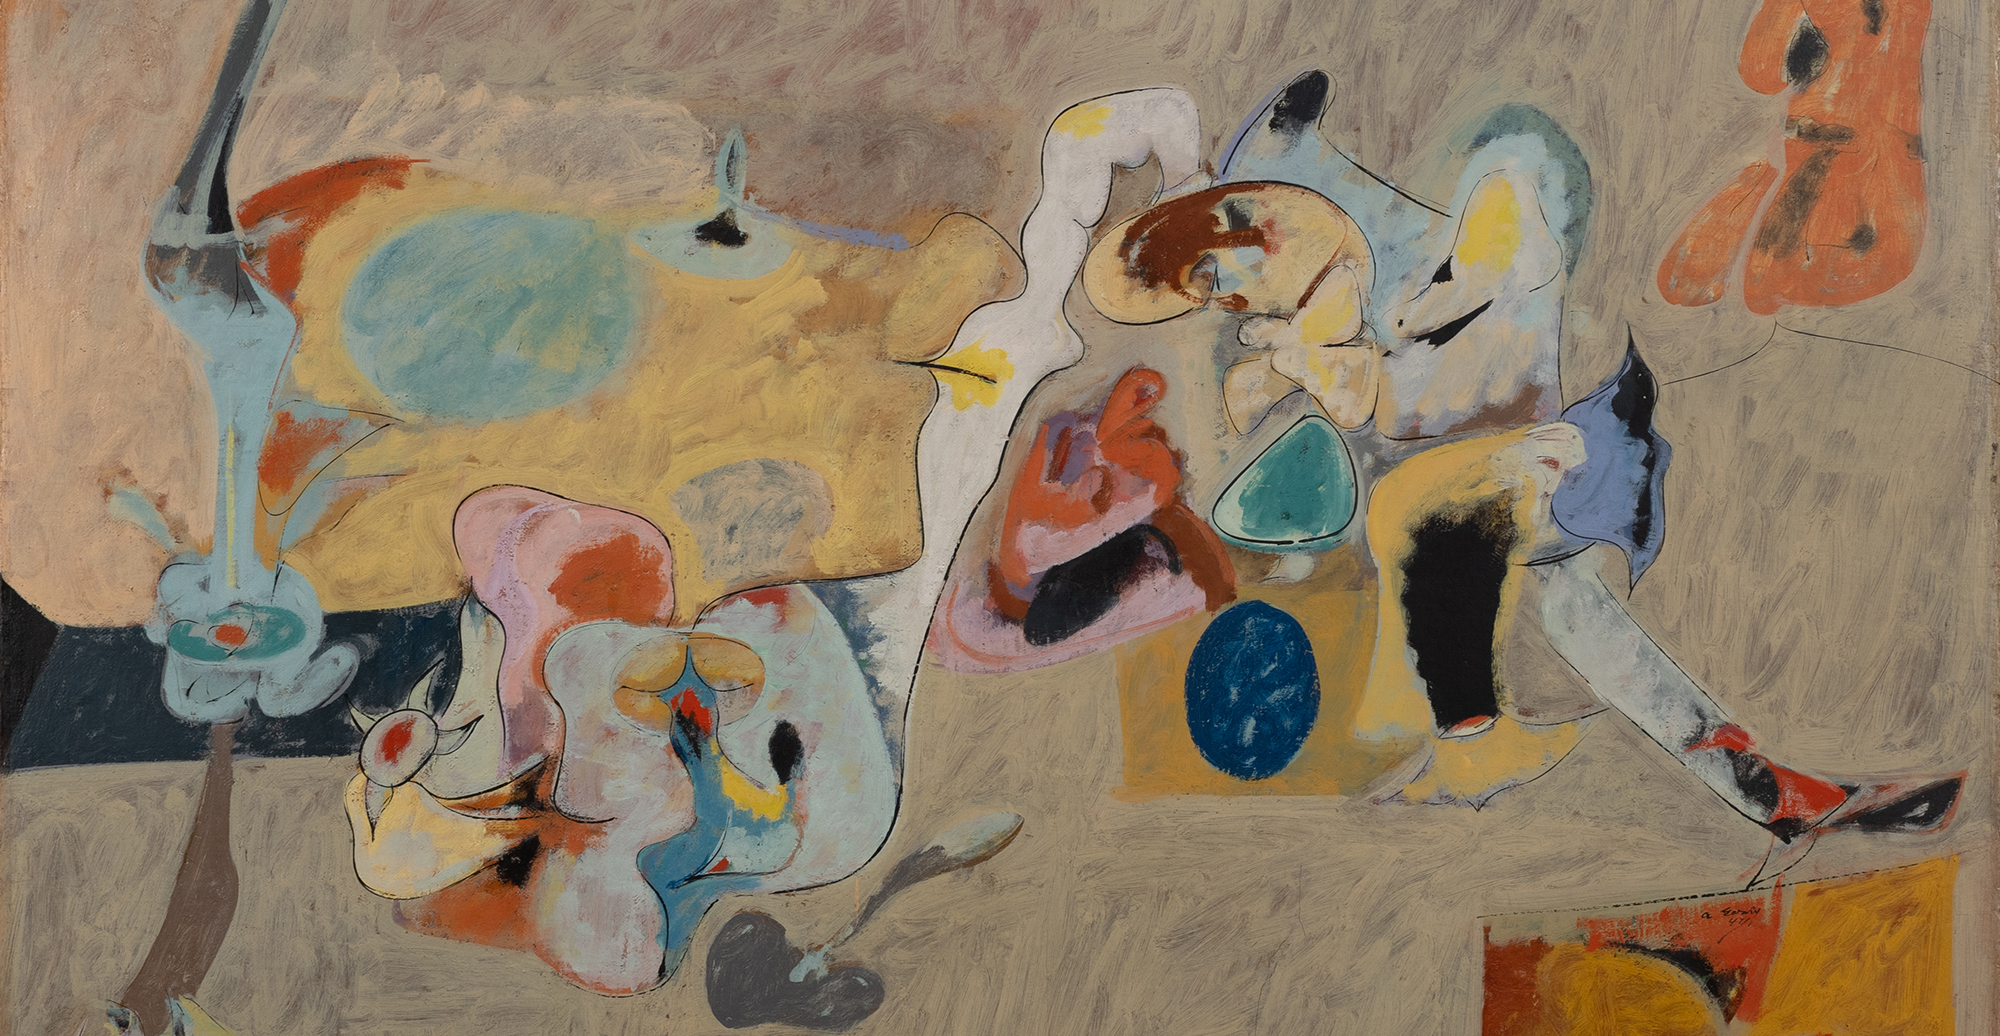 Arshile Gorky, The Plow and the Song, 1947